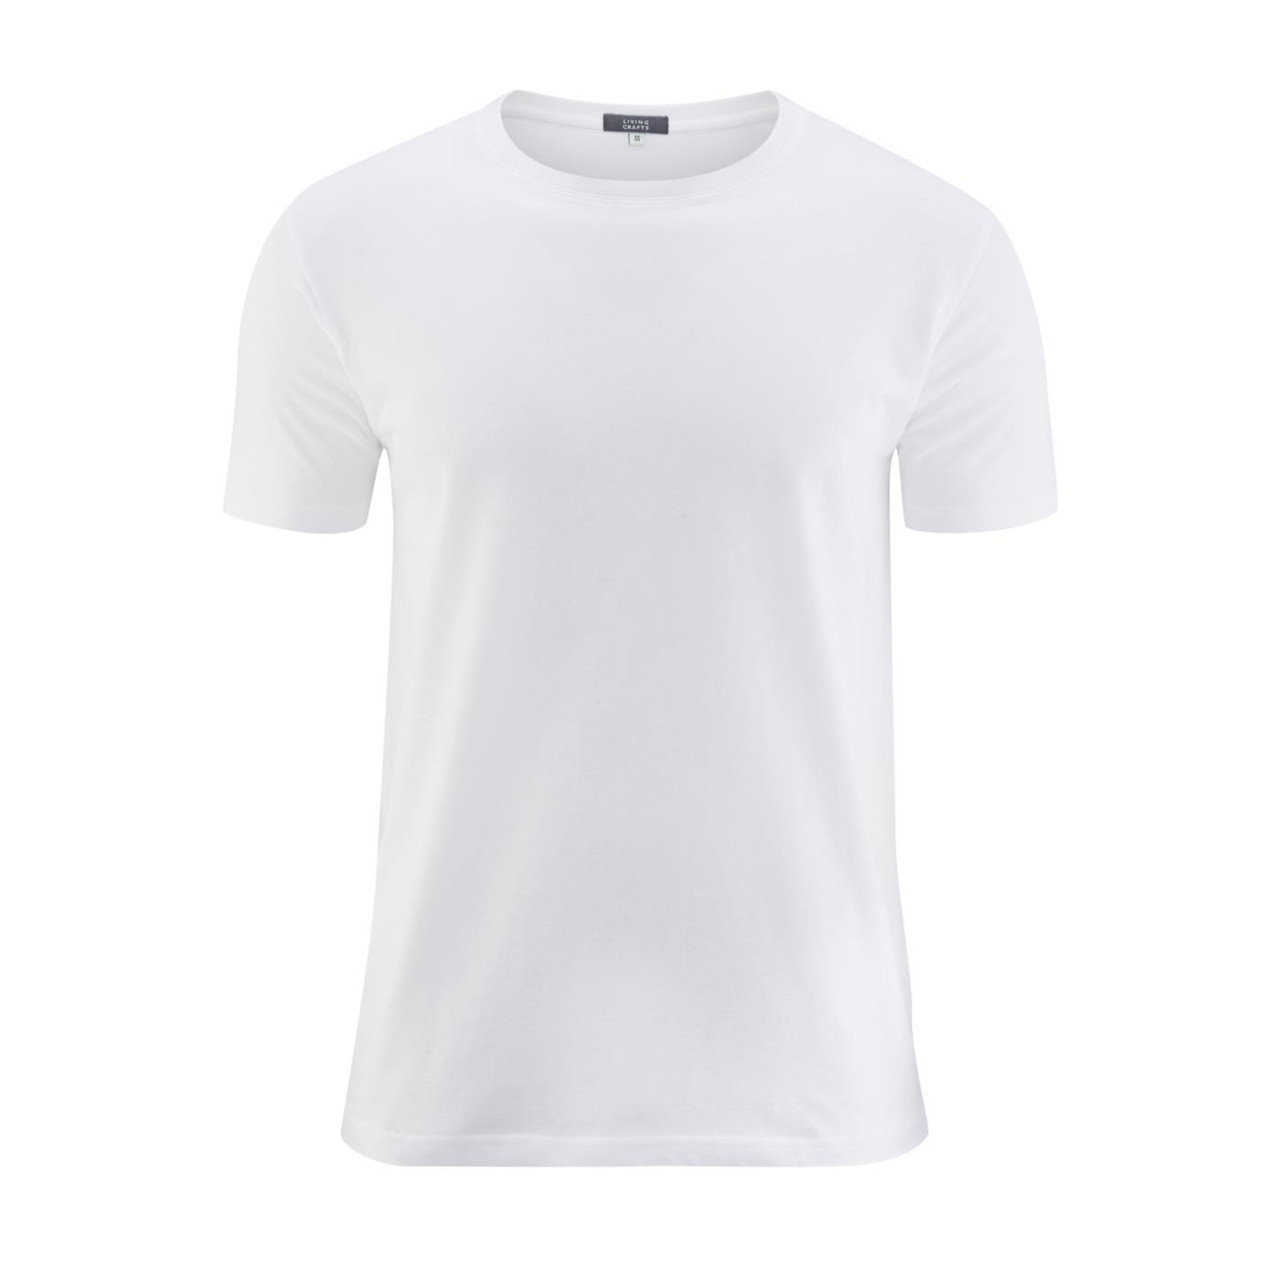 Organic Cotton Fabian T-Shirt in White (Pack of 2) - Living Crafts